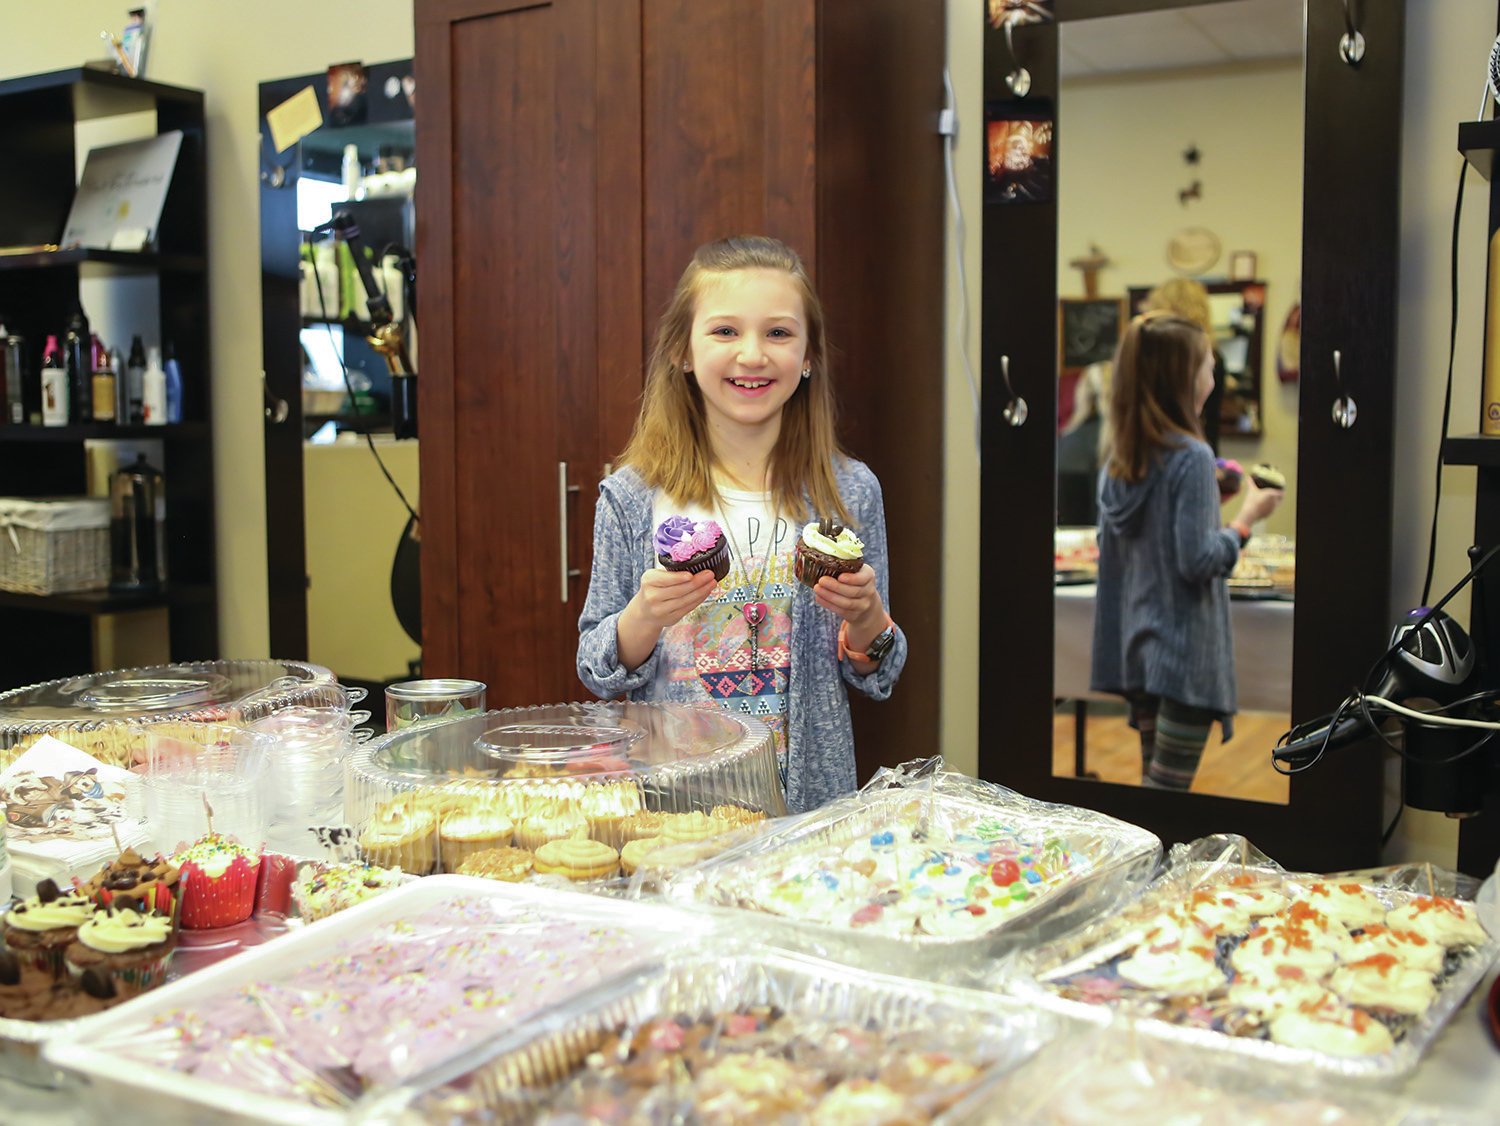 KIND HEART- Jayda Monilaws is selling cupcakes at the Mane Attraction in support of the SPCA on National Cupcake Day in Red Deer today. Funds go towards supporting the animals at the shelter.